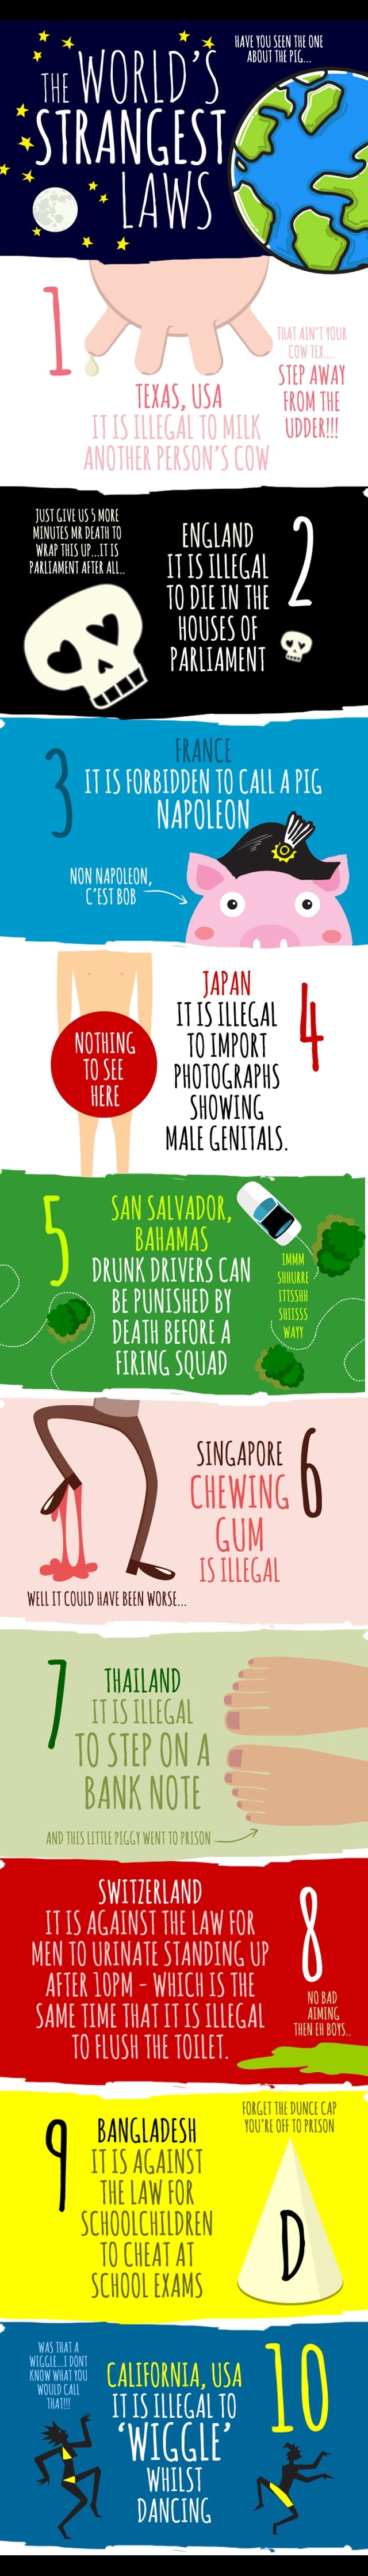 The World’s 10 Strangest Laws [Infographic]